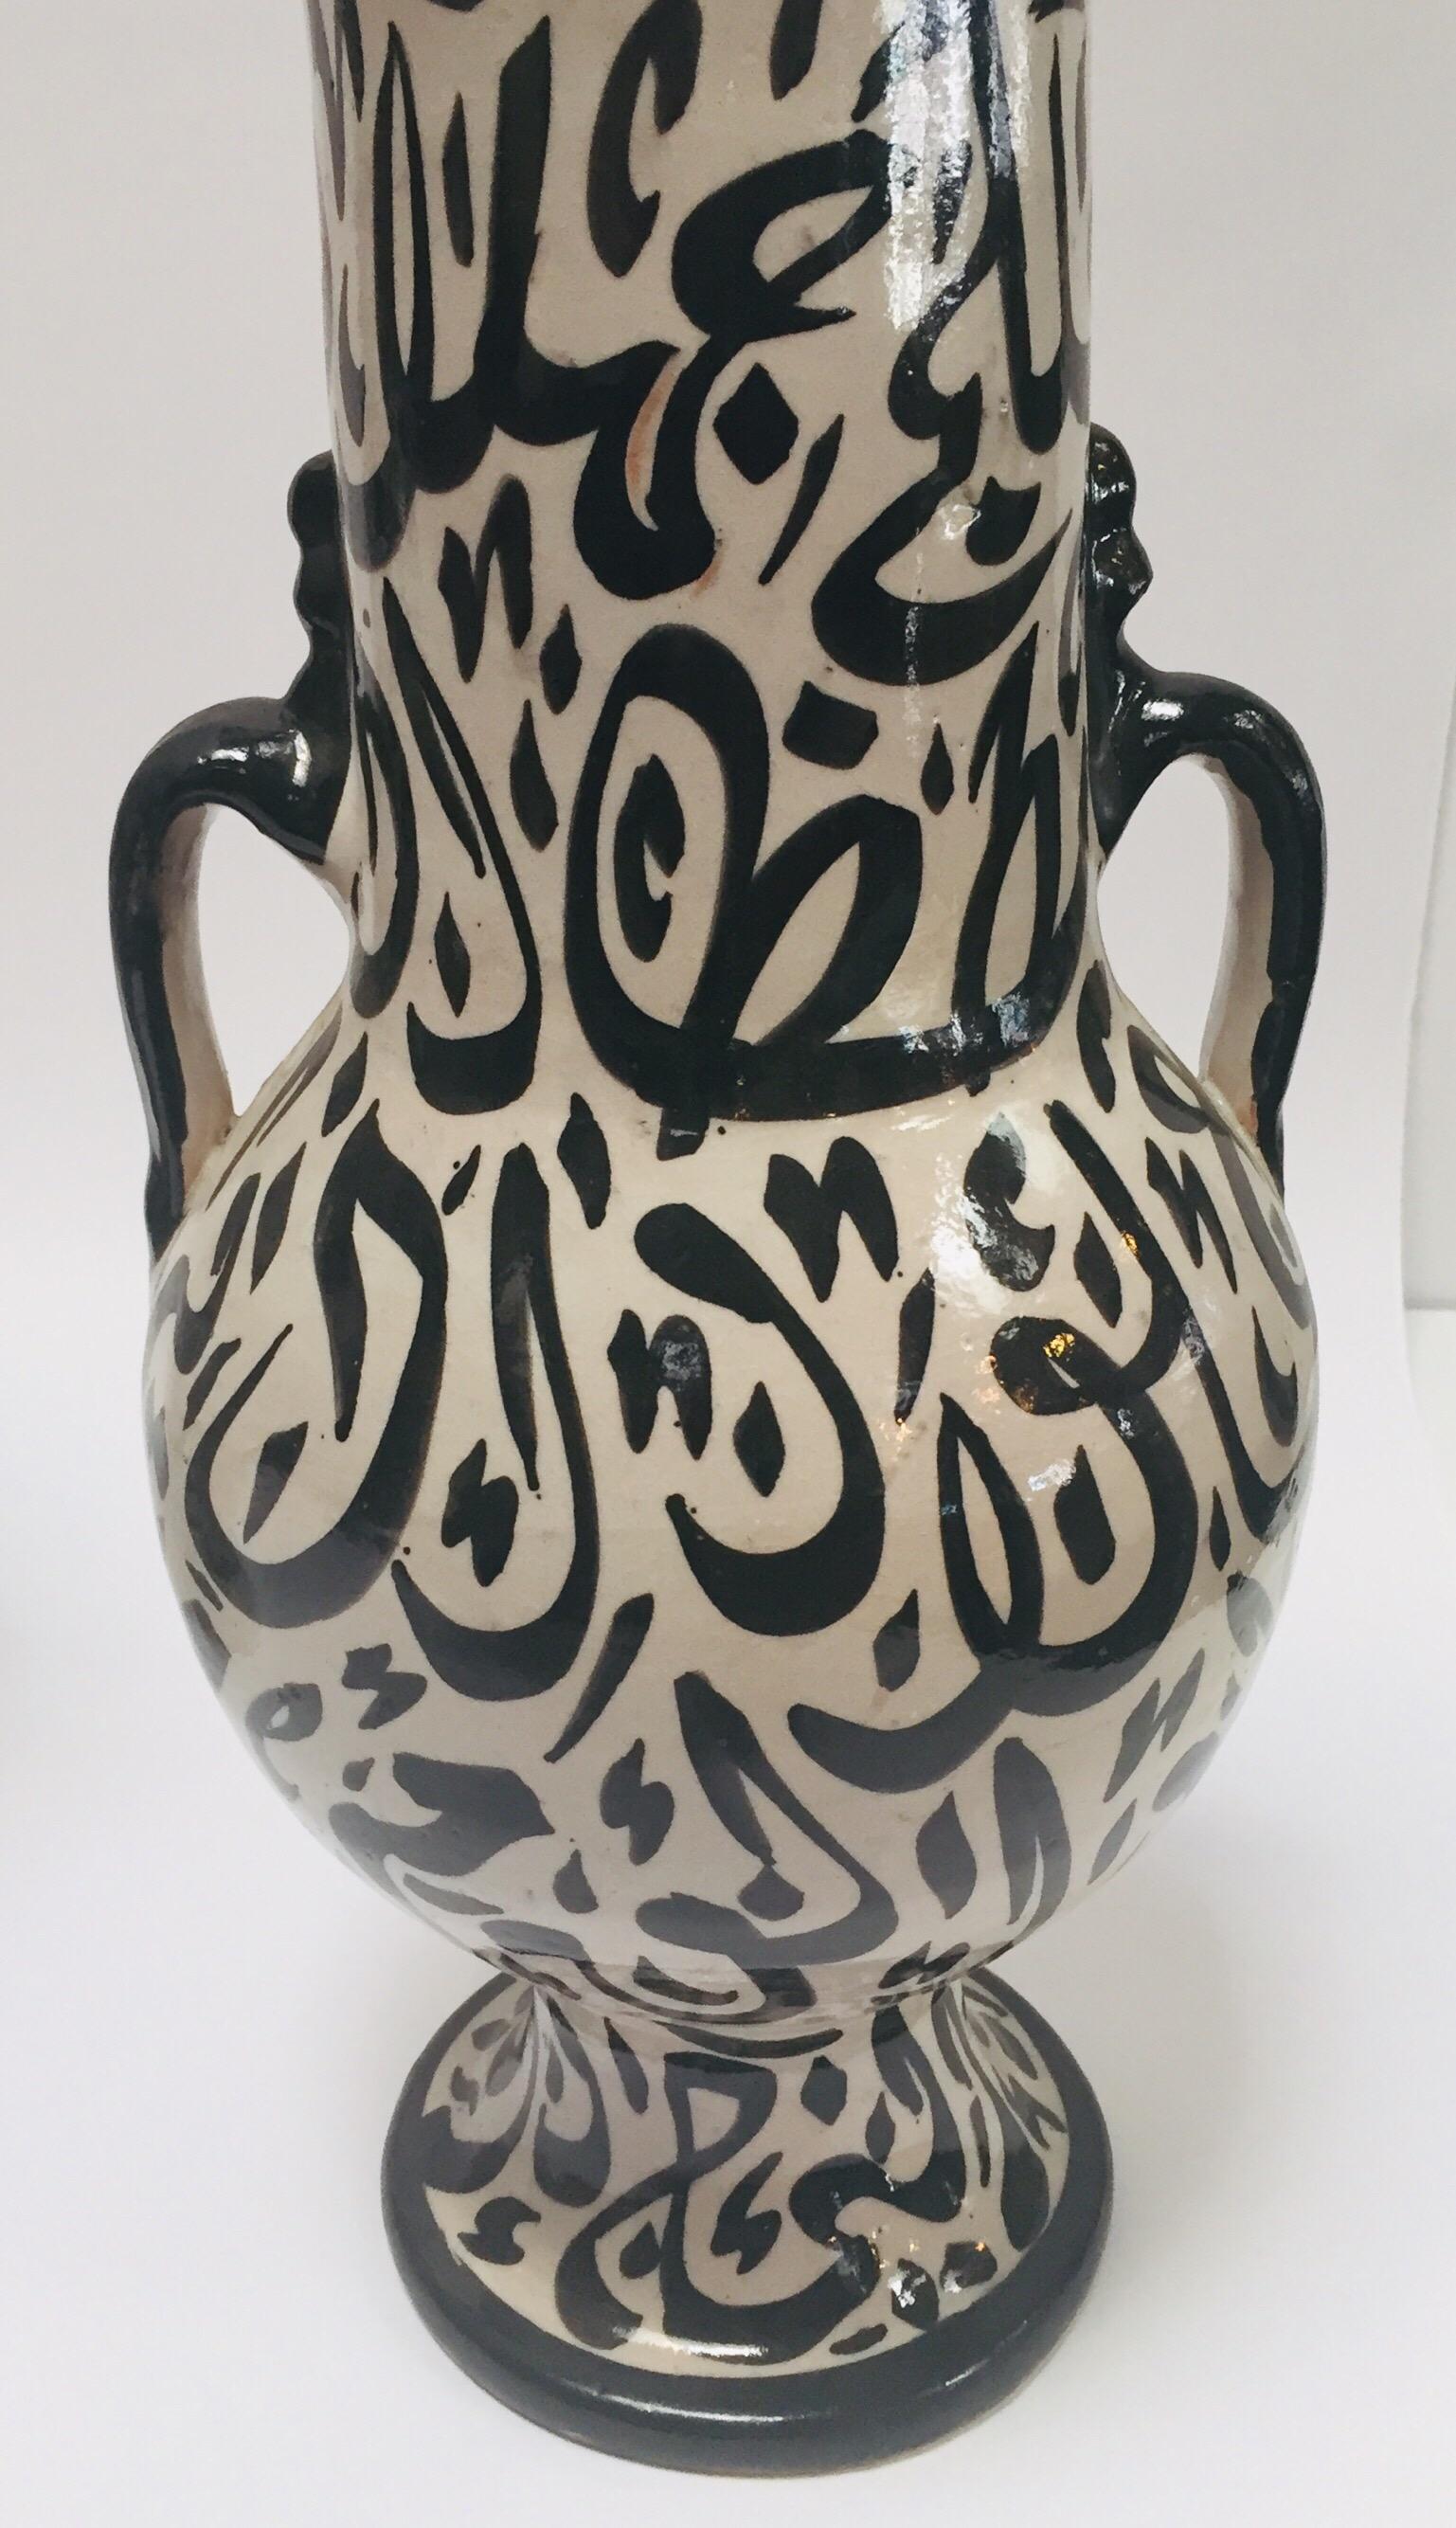 Moroccan Glazed Ceramic Vase with Arabic Calligraphy from Fez 1